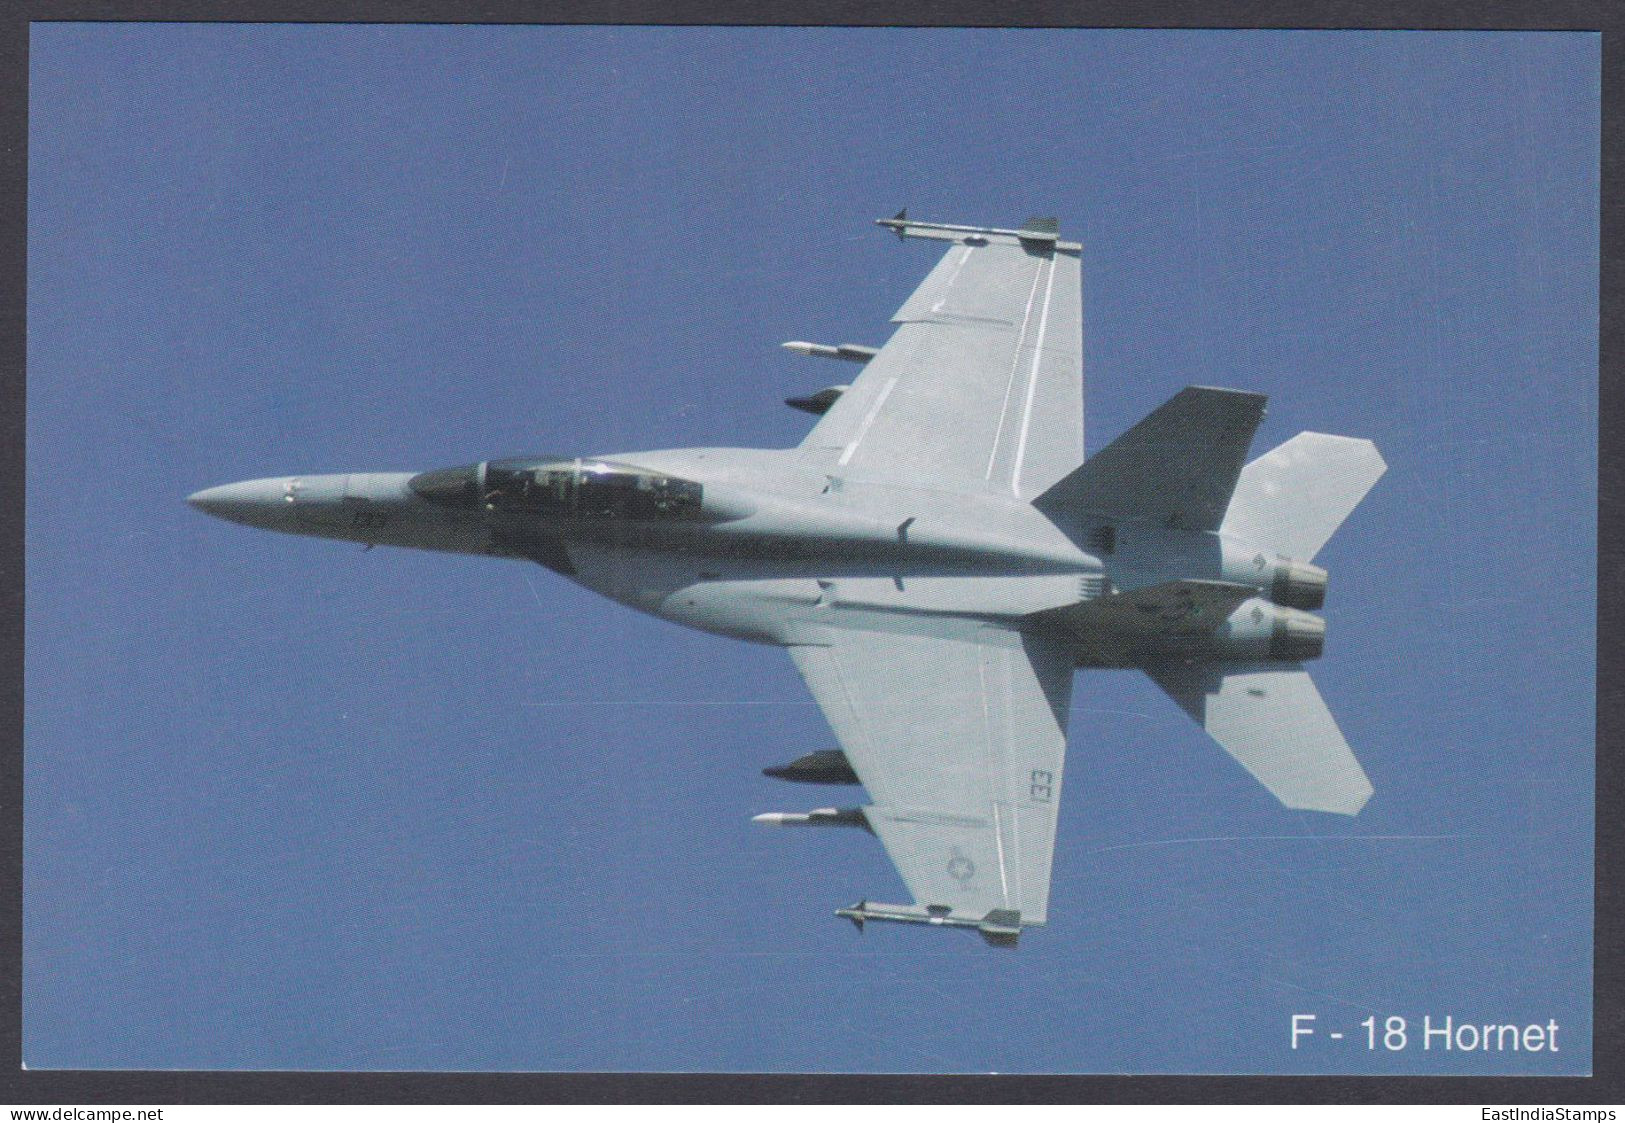 Inde India 2007 Mint Postcard Bangalore Air Show F-18, Hornet, Fighter Jet, Aircraft, Airplane, Aeroplane - Inde